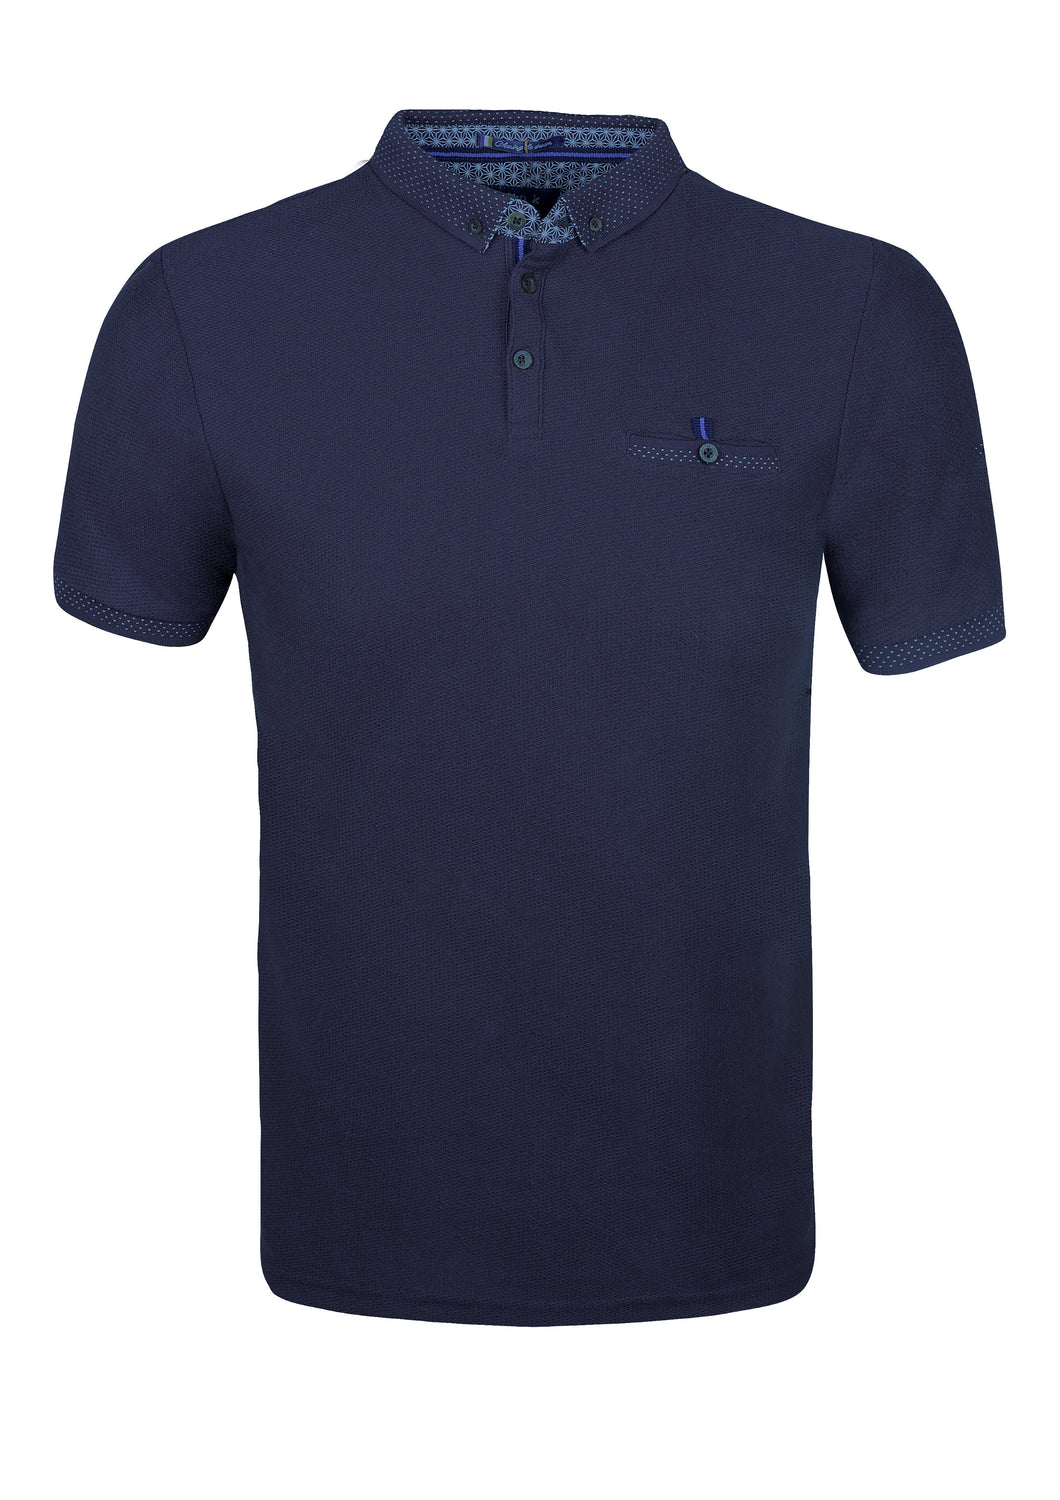 POLO SHIRT - JERSEY - WITH POCKET - NAVY